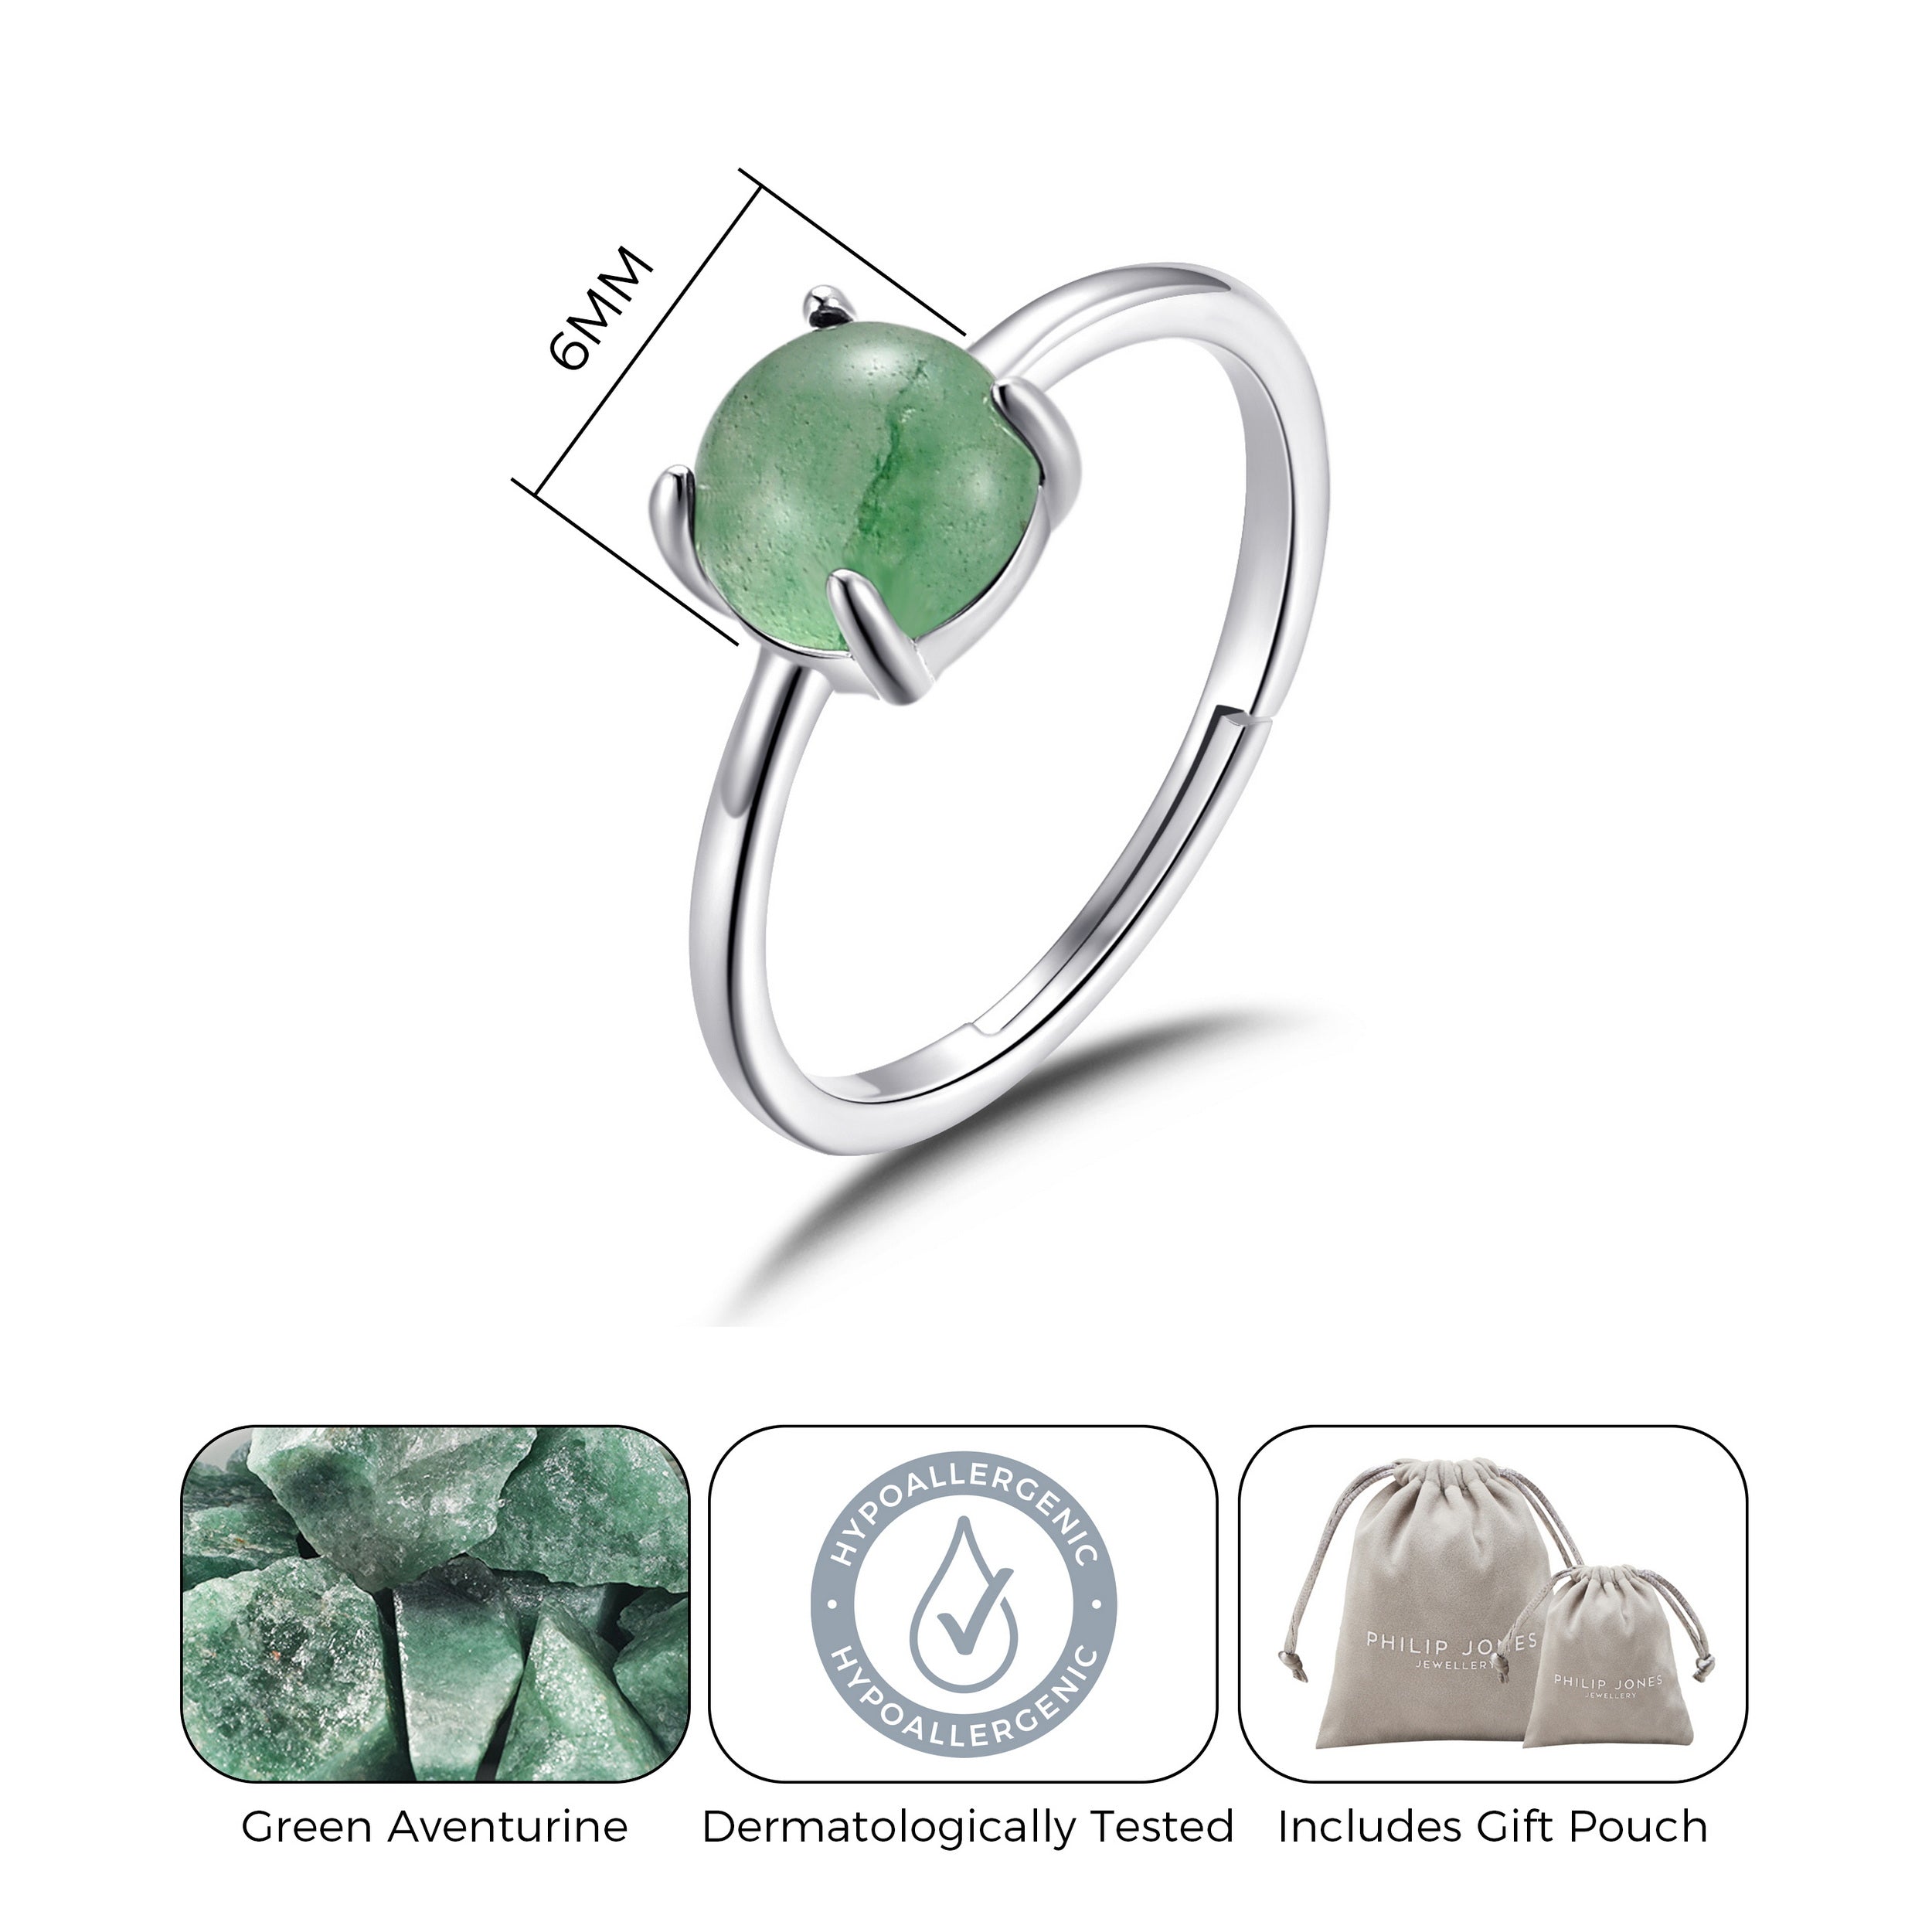 Green Aventurine Adjustable Ring with Quote Card